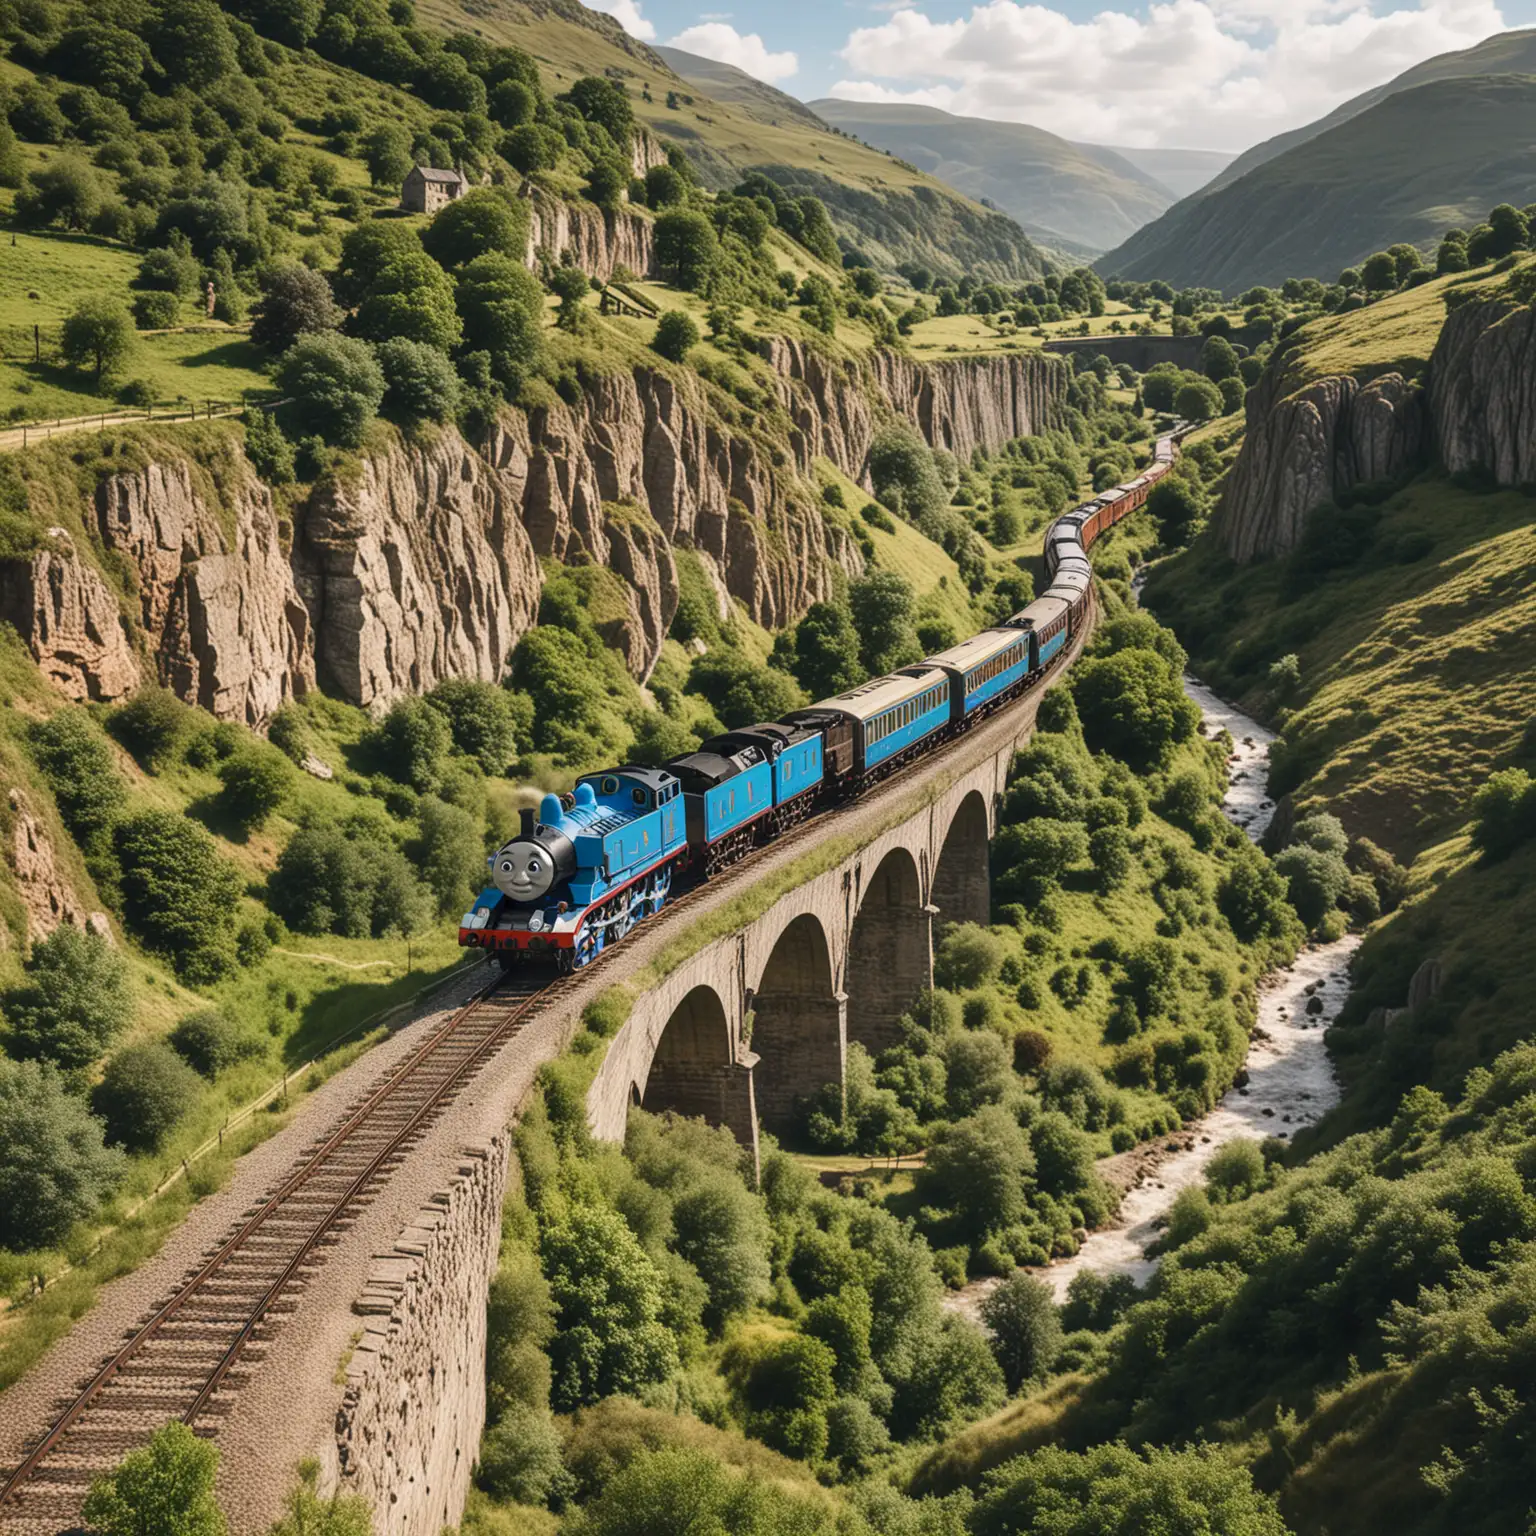 Thomas the Tank Engine Journeying Through a Scenic Valley